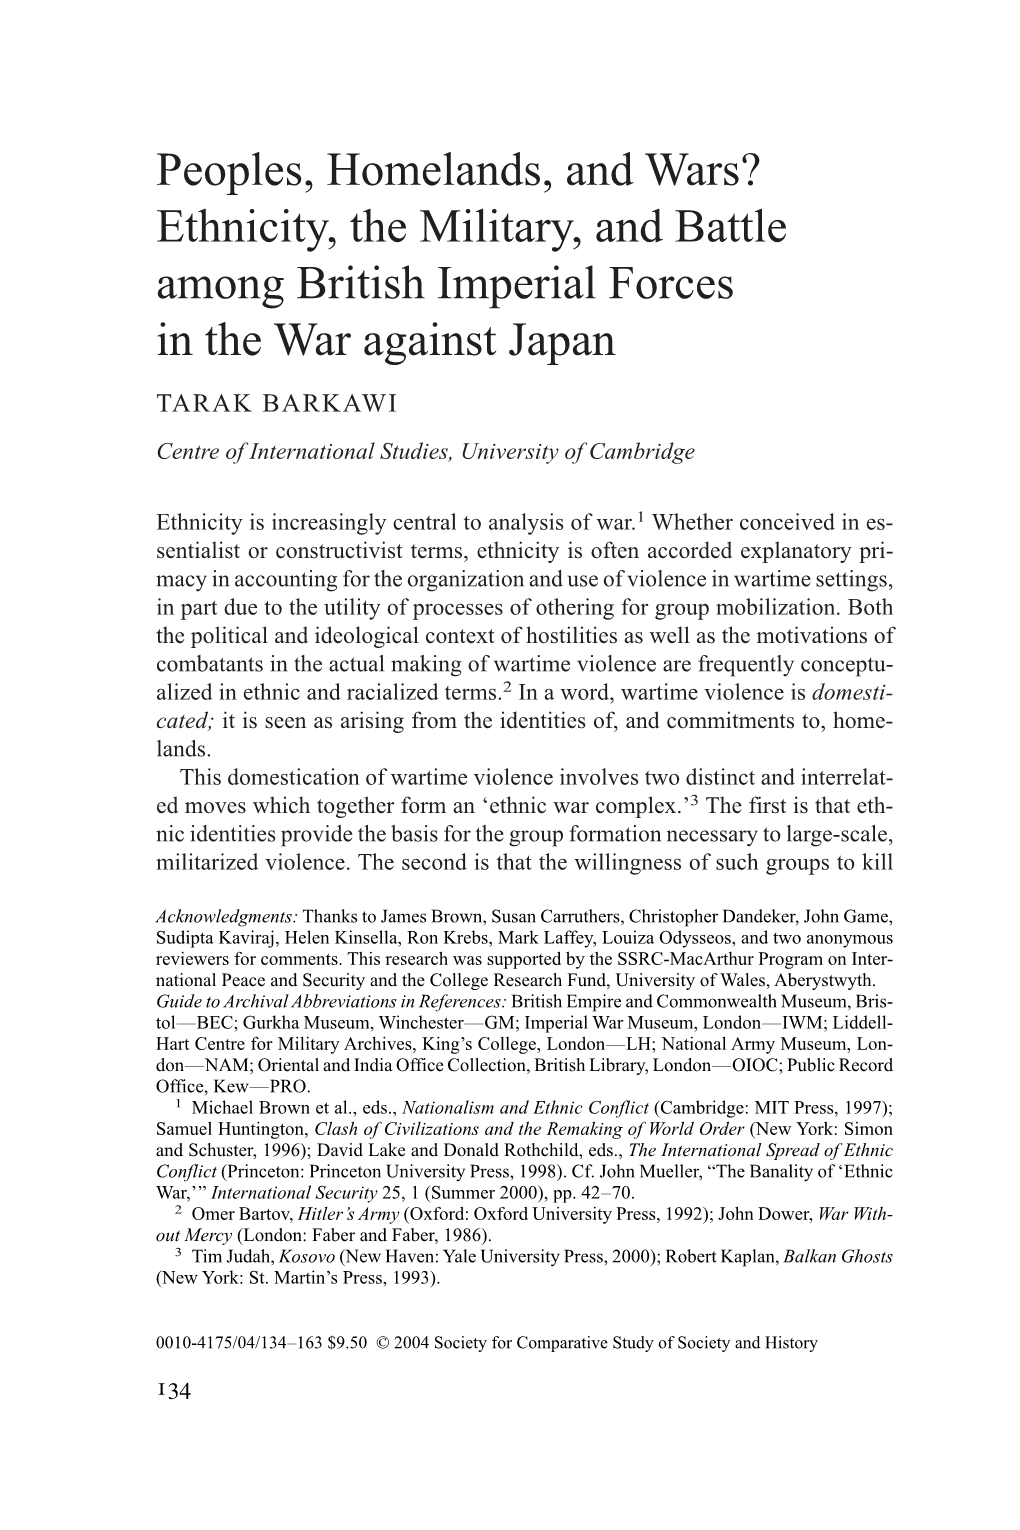 Ethnicity, the Military, and Battle Among British Imperial Forces in the War Against Japan